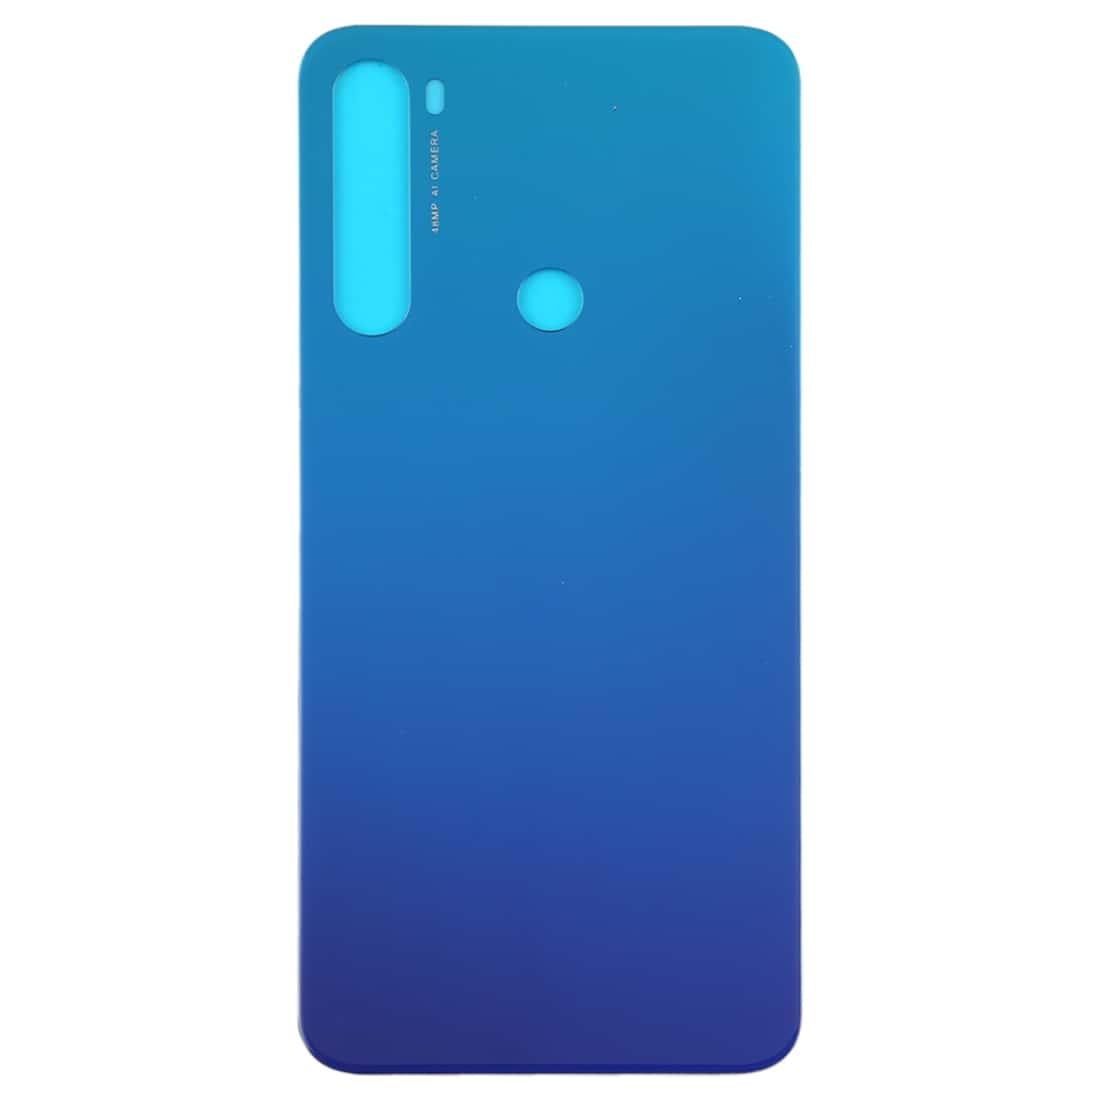 Back Glass Panel for  Xiaomi Redmi Note 8 Blue